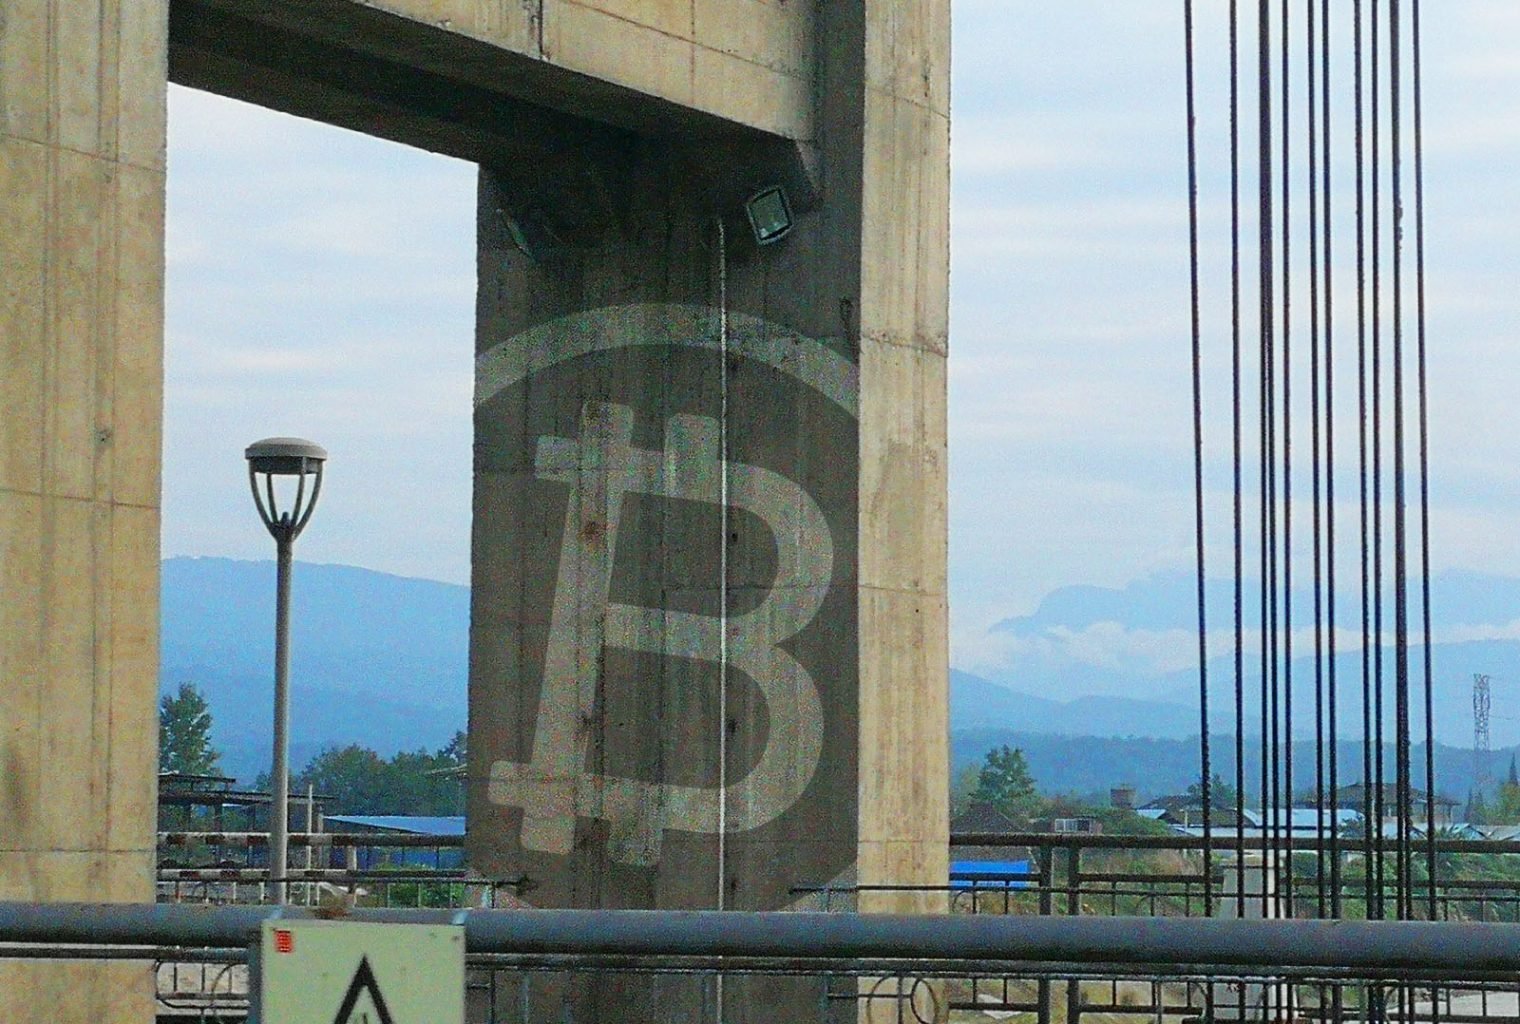 A Visit To A Bitcoin Mining Farm In Sichuan China Reveals Troubles - 